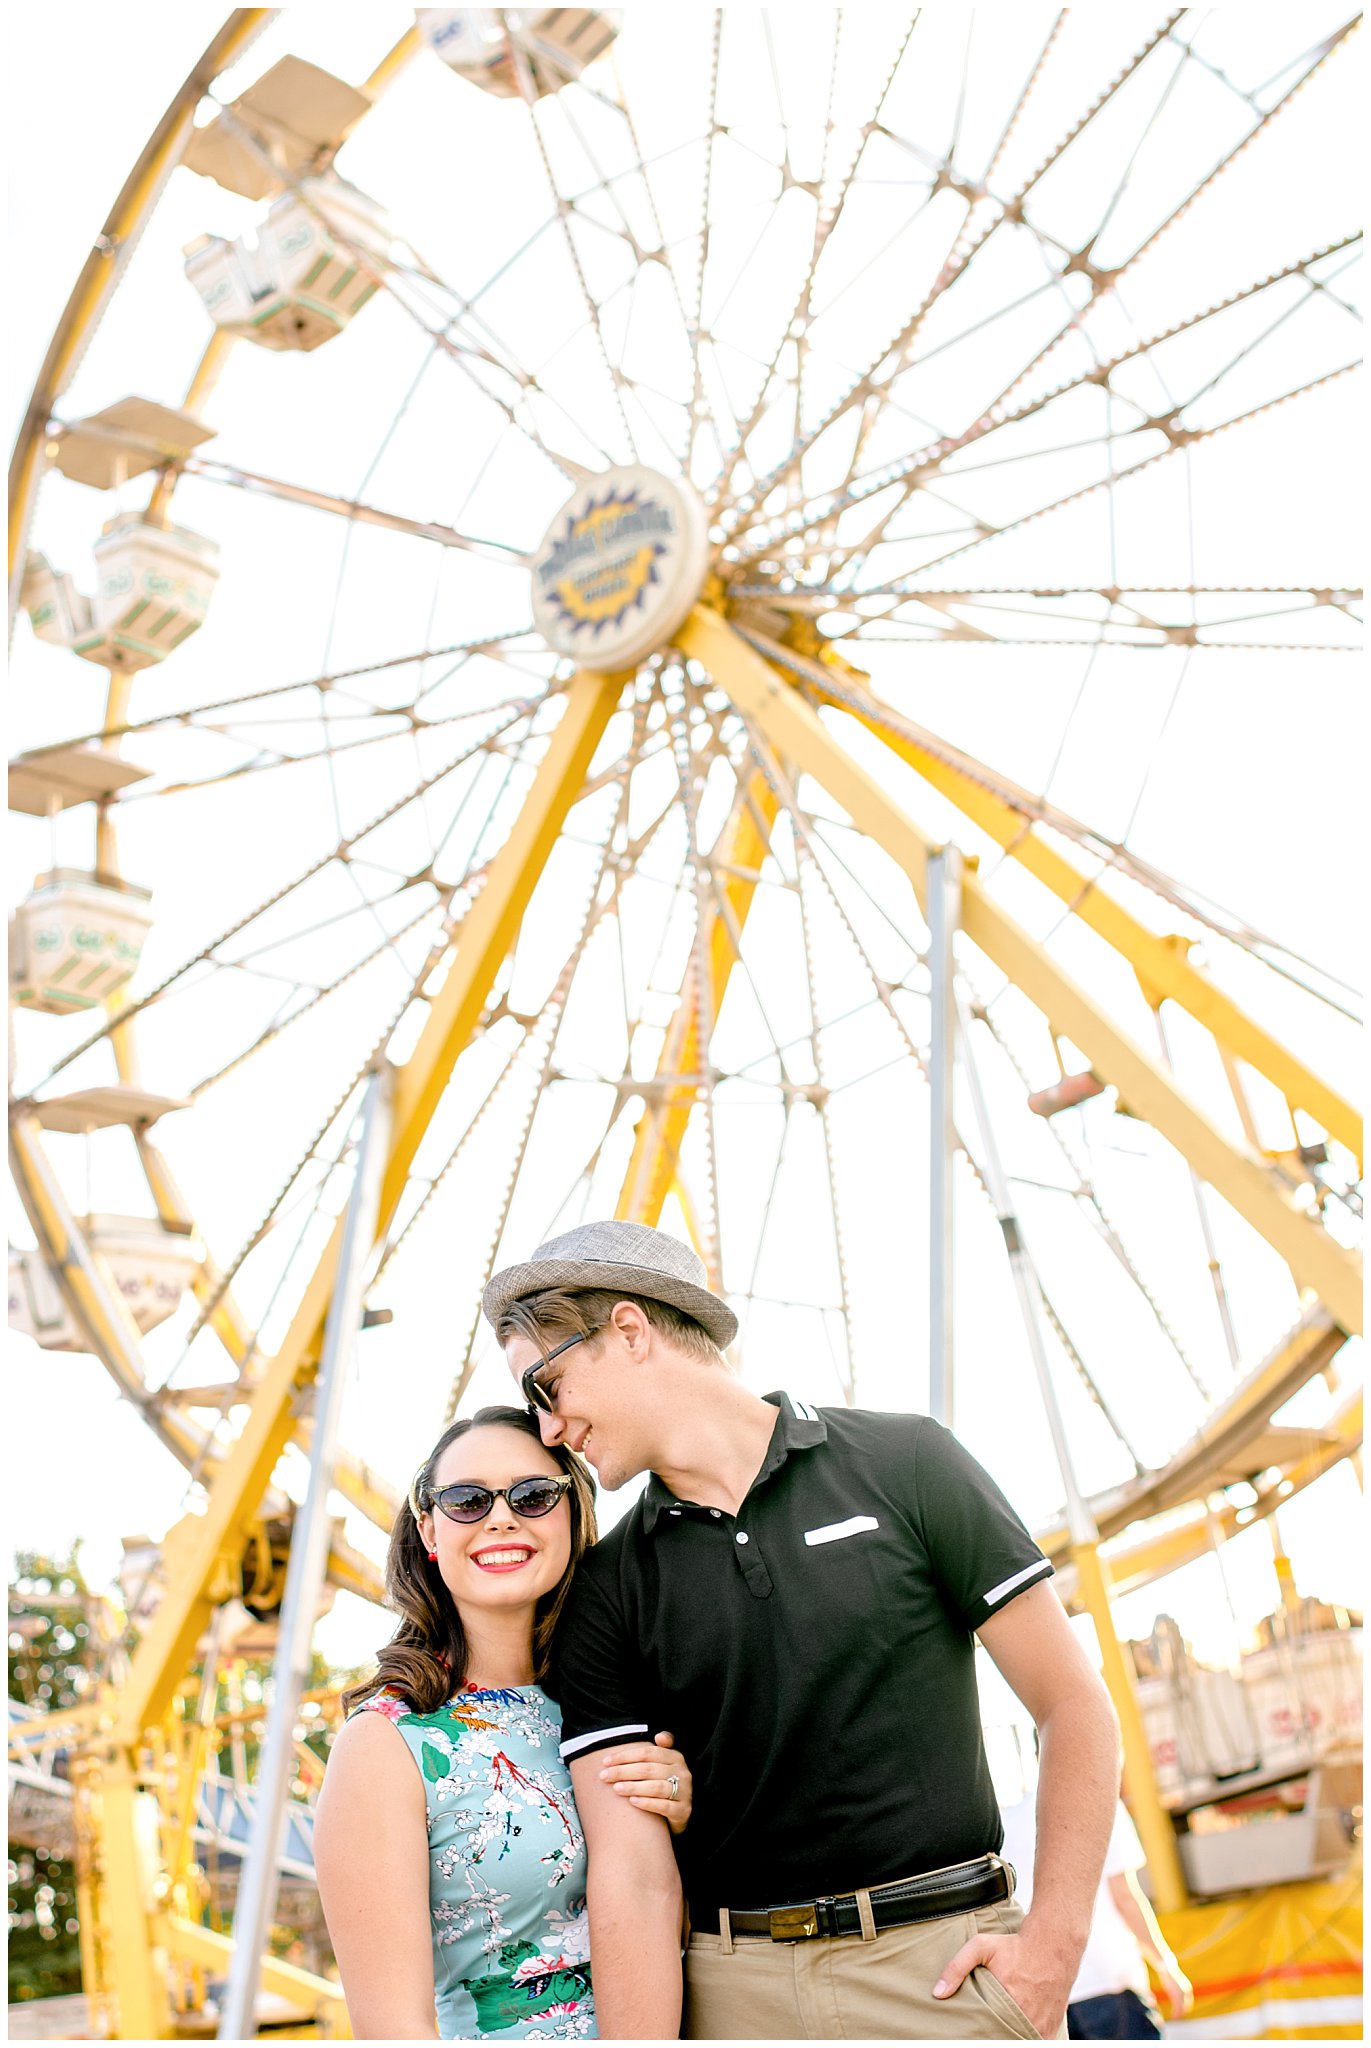 Couple by the Ferris Wheel at the State Fair for their engagement session in Utah | Jessie and Dallin Photography | Utah Wedding Photographers